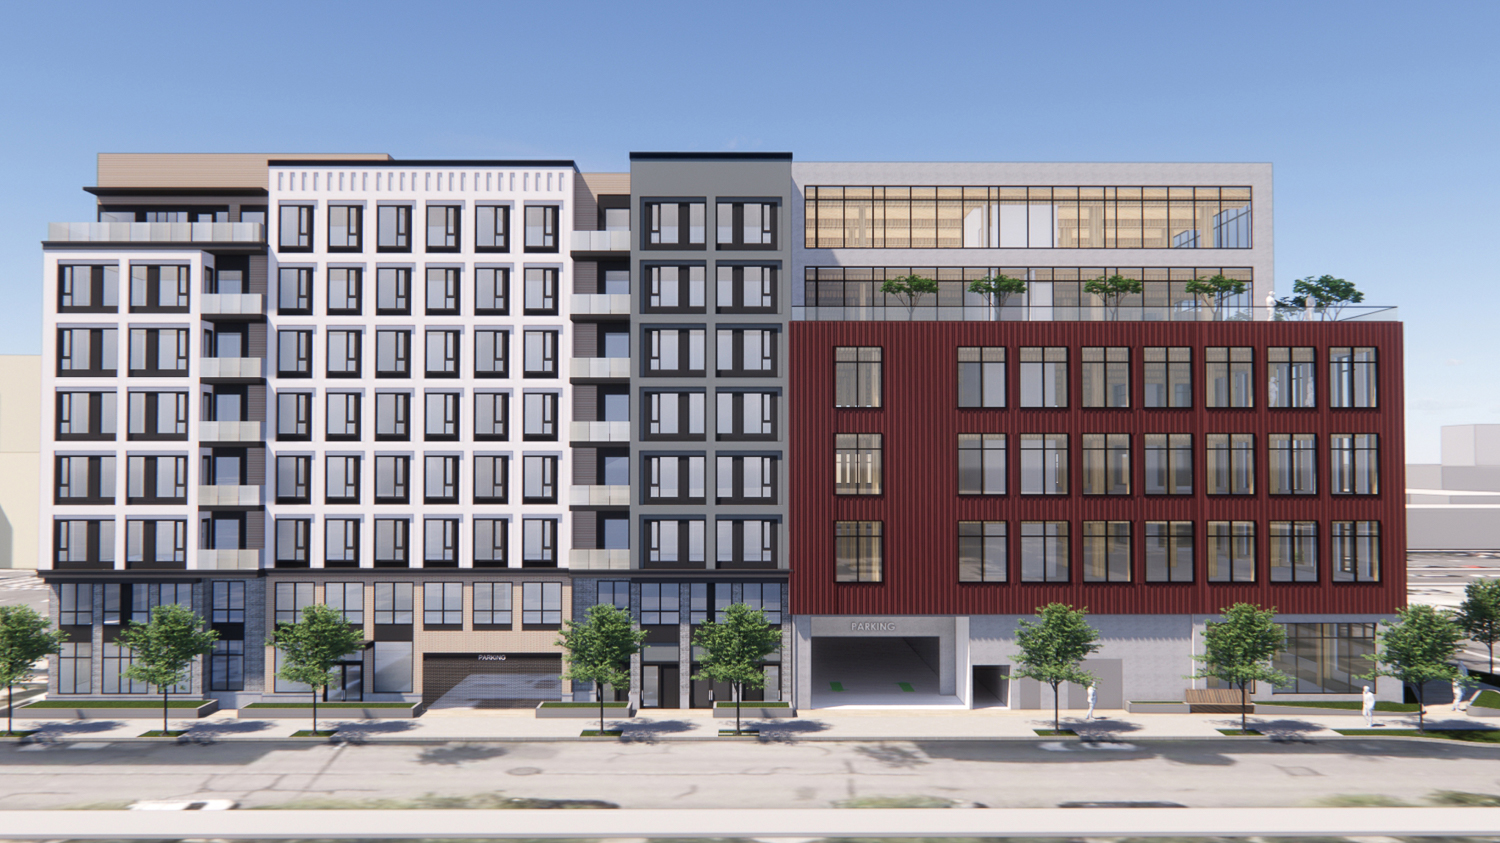 Post + Beam housing (left) and offices (right) along South Eldorado Street, rendering by RMW Architecture